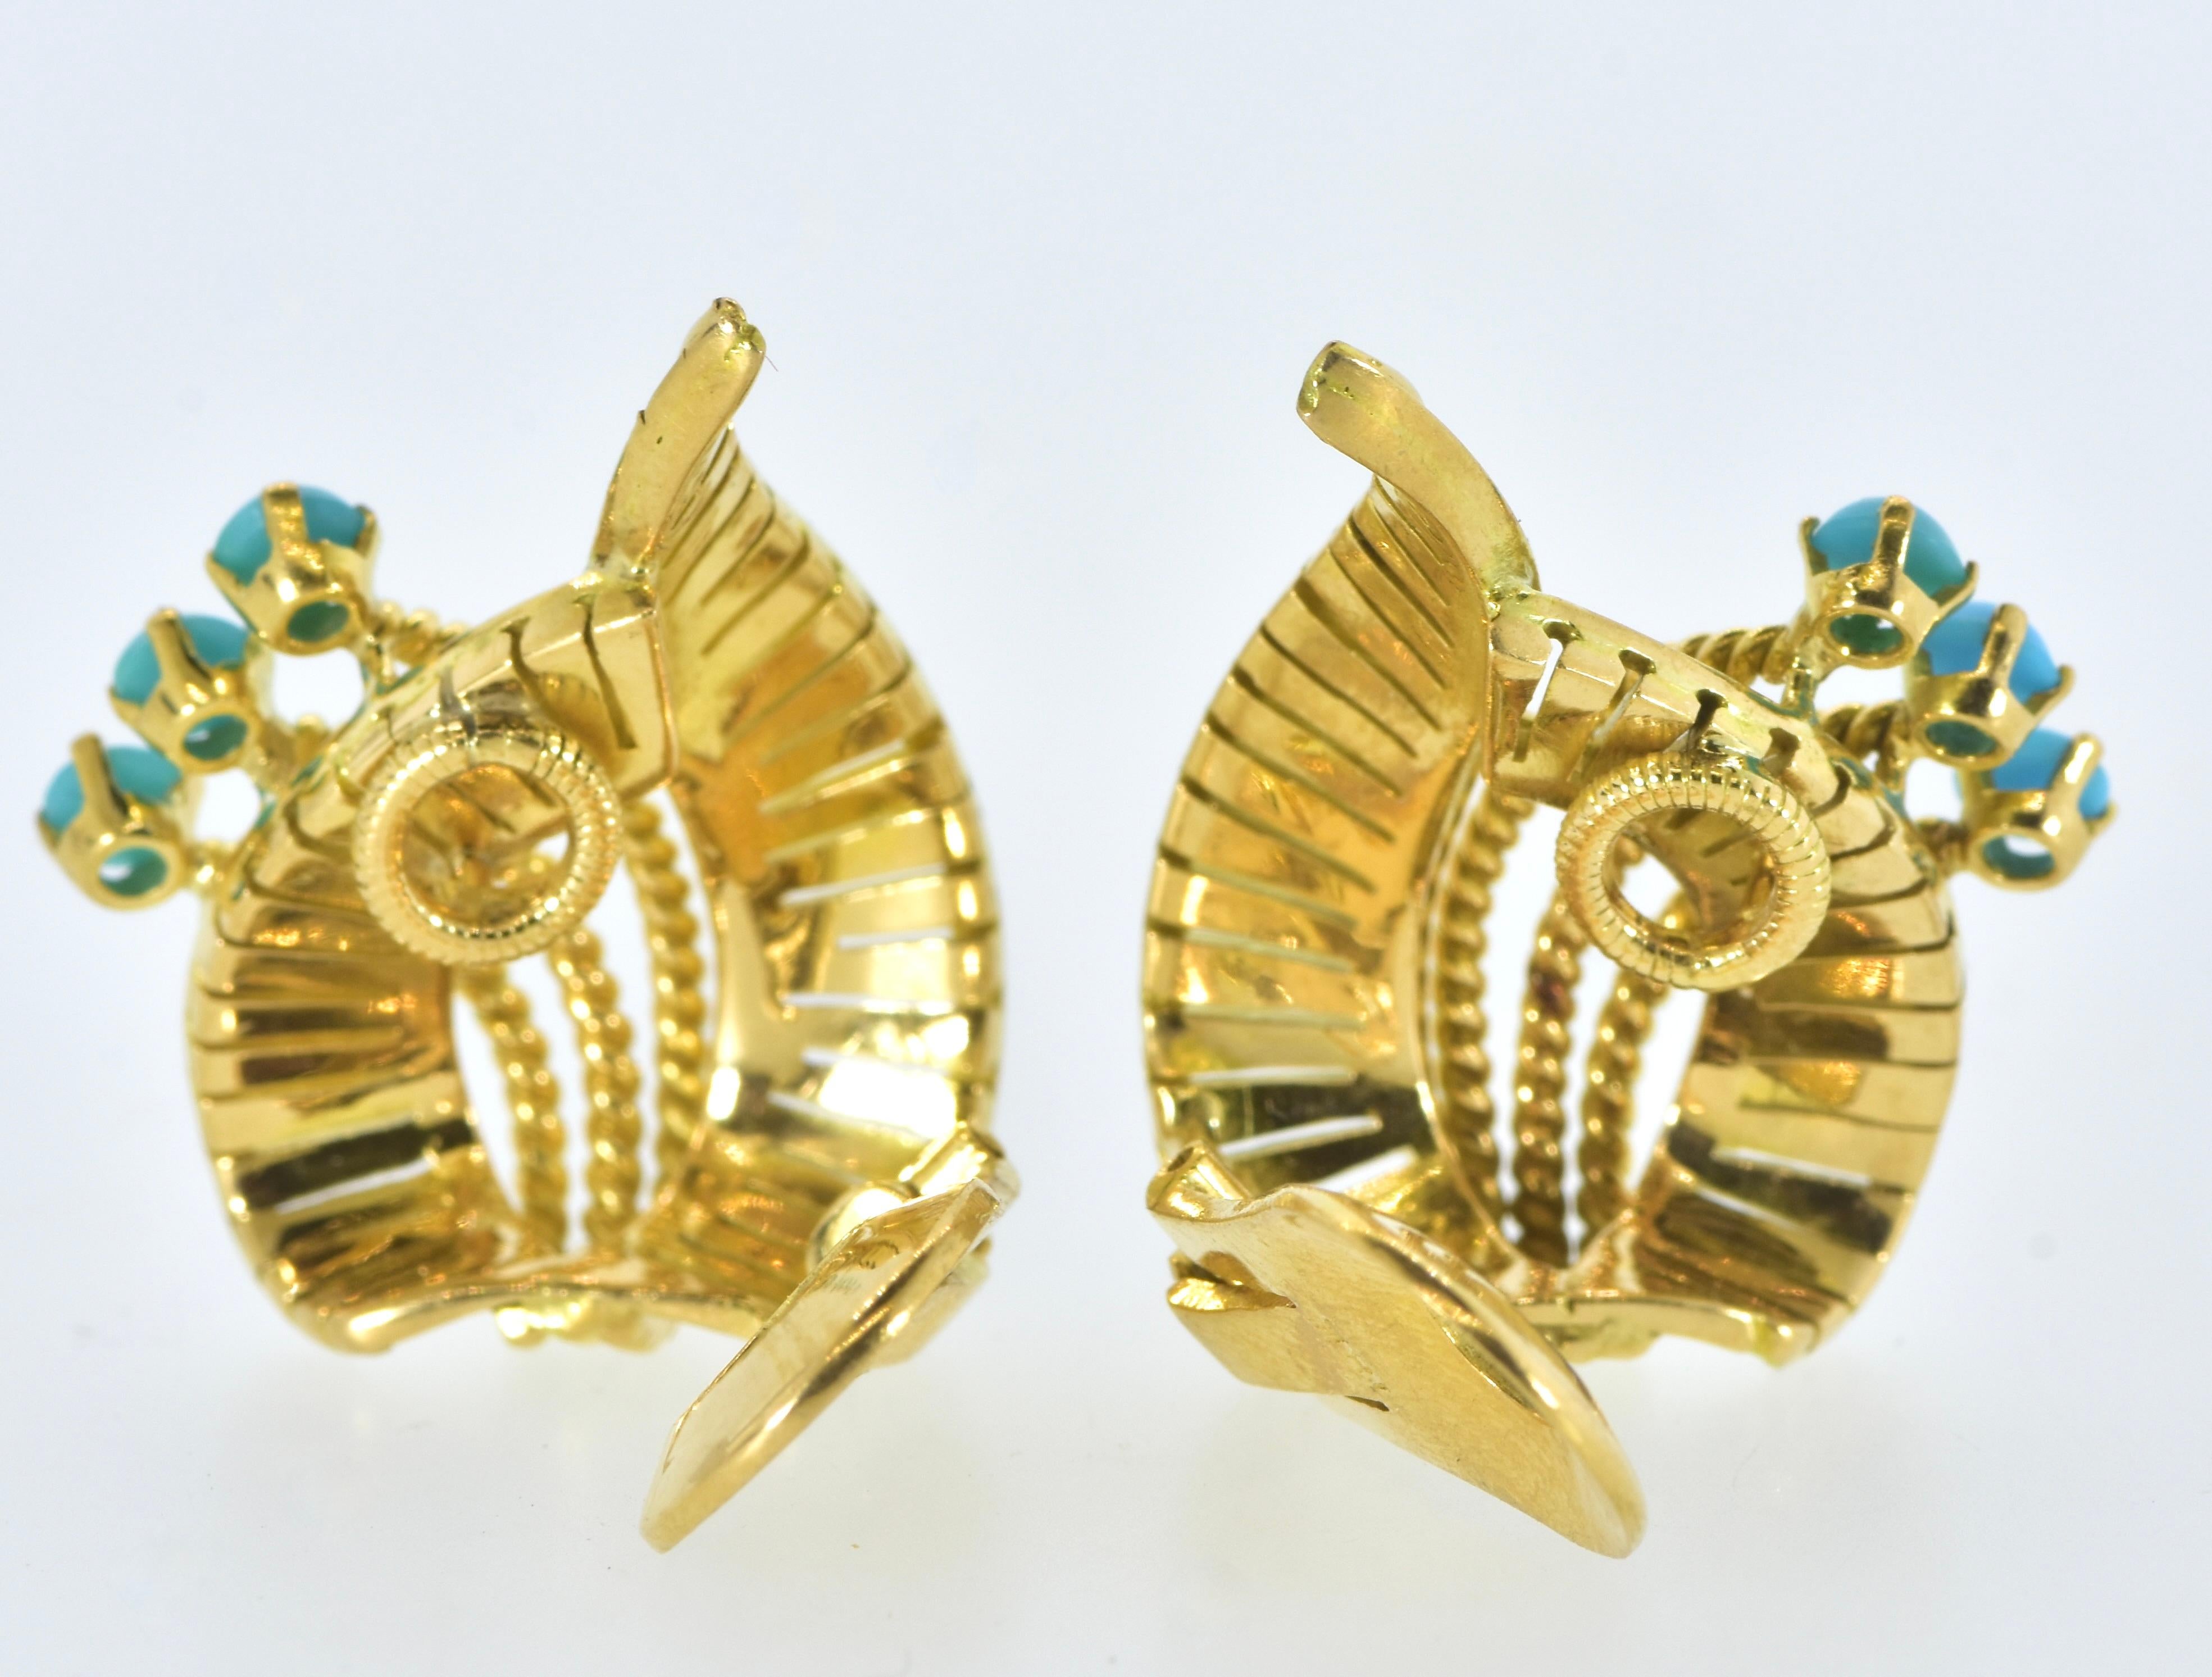 Women's or Men's 18K Yellow Gold Earrings with Fine Turquoise in a Leaf Motif, Vintage , c. 1950. For Sale